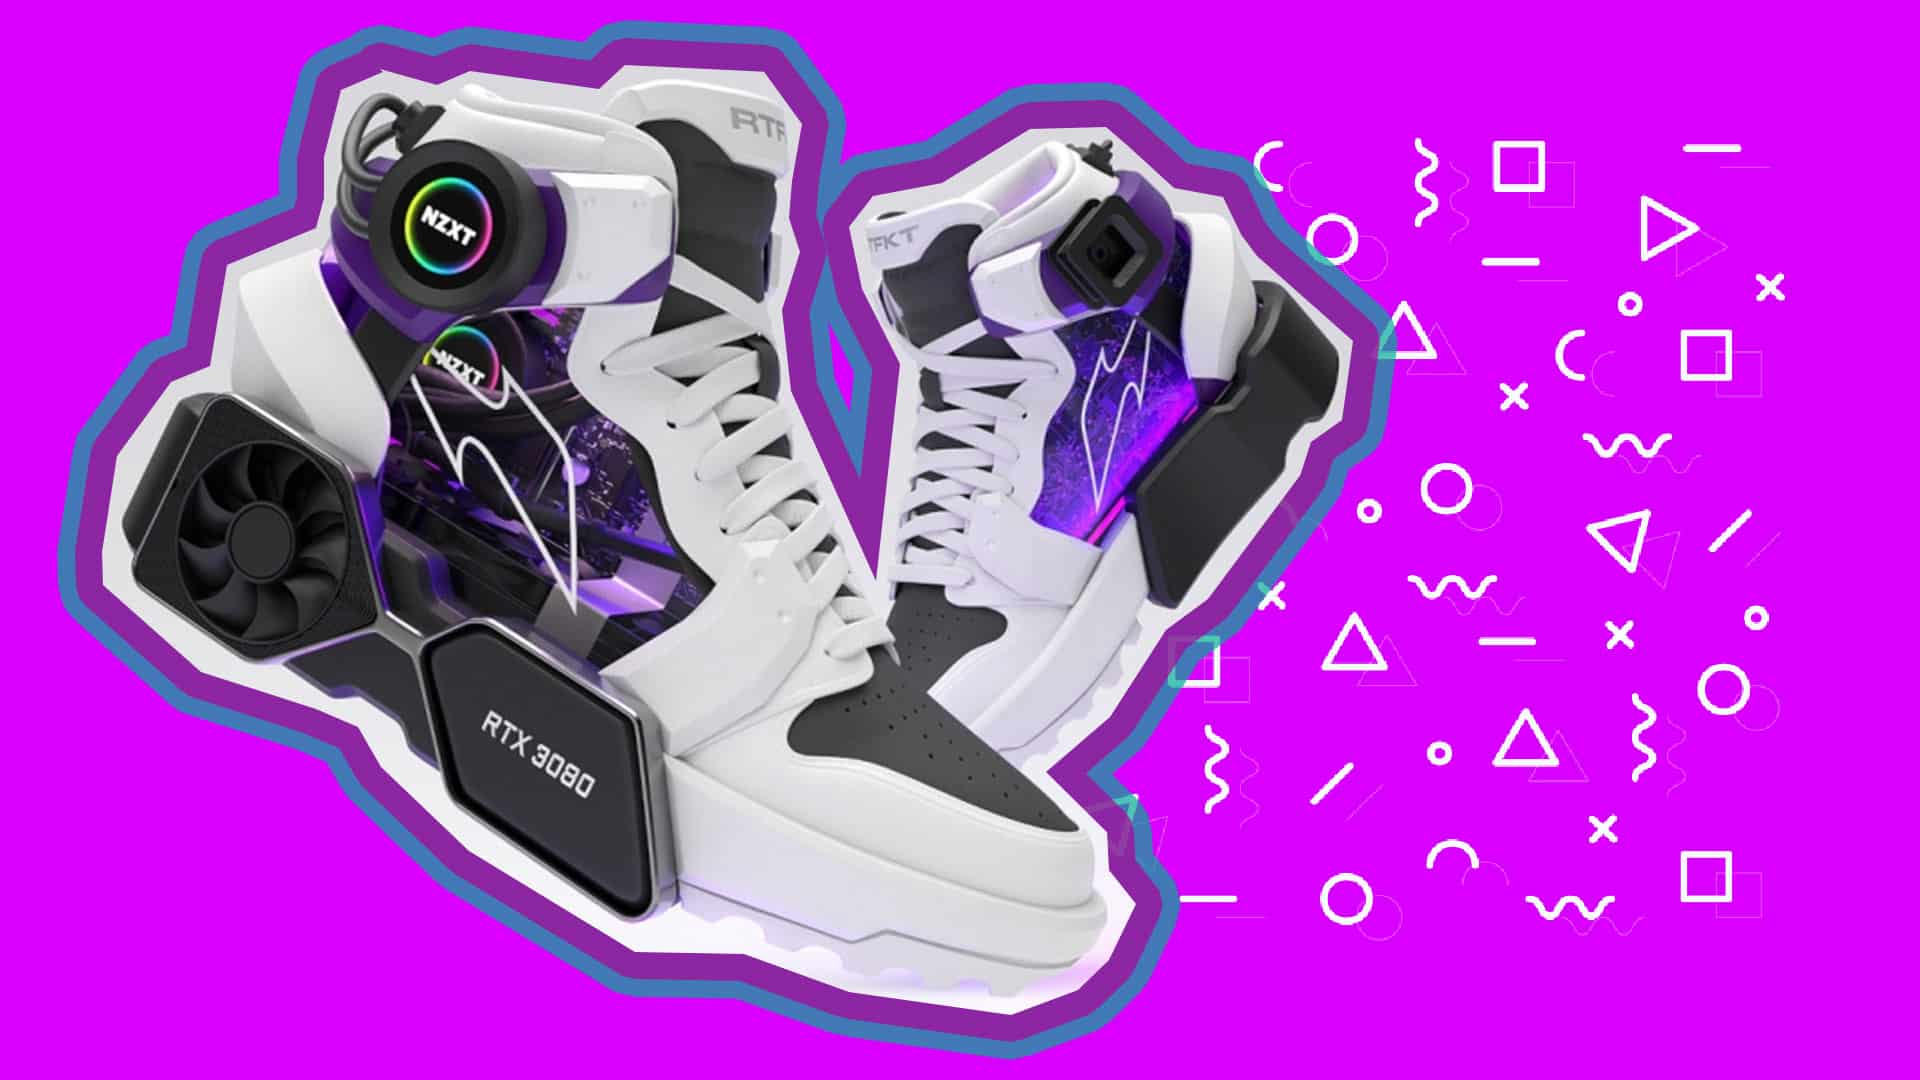 RTX 3080 Sneakers: Is The NZXT x RTKFT PC Wearable?